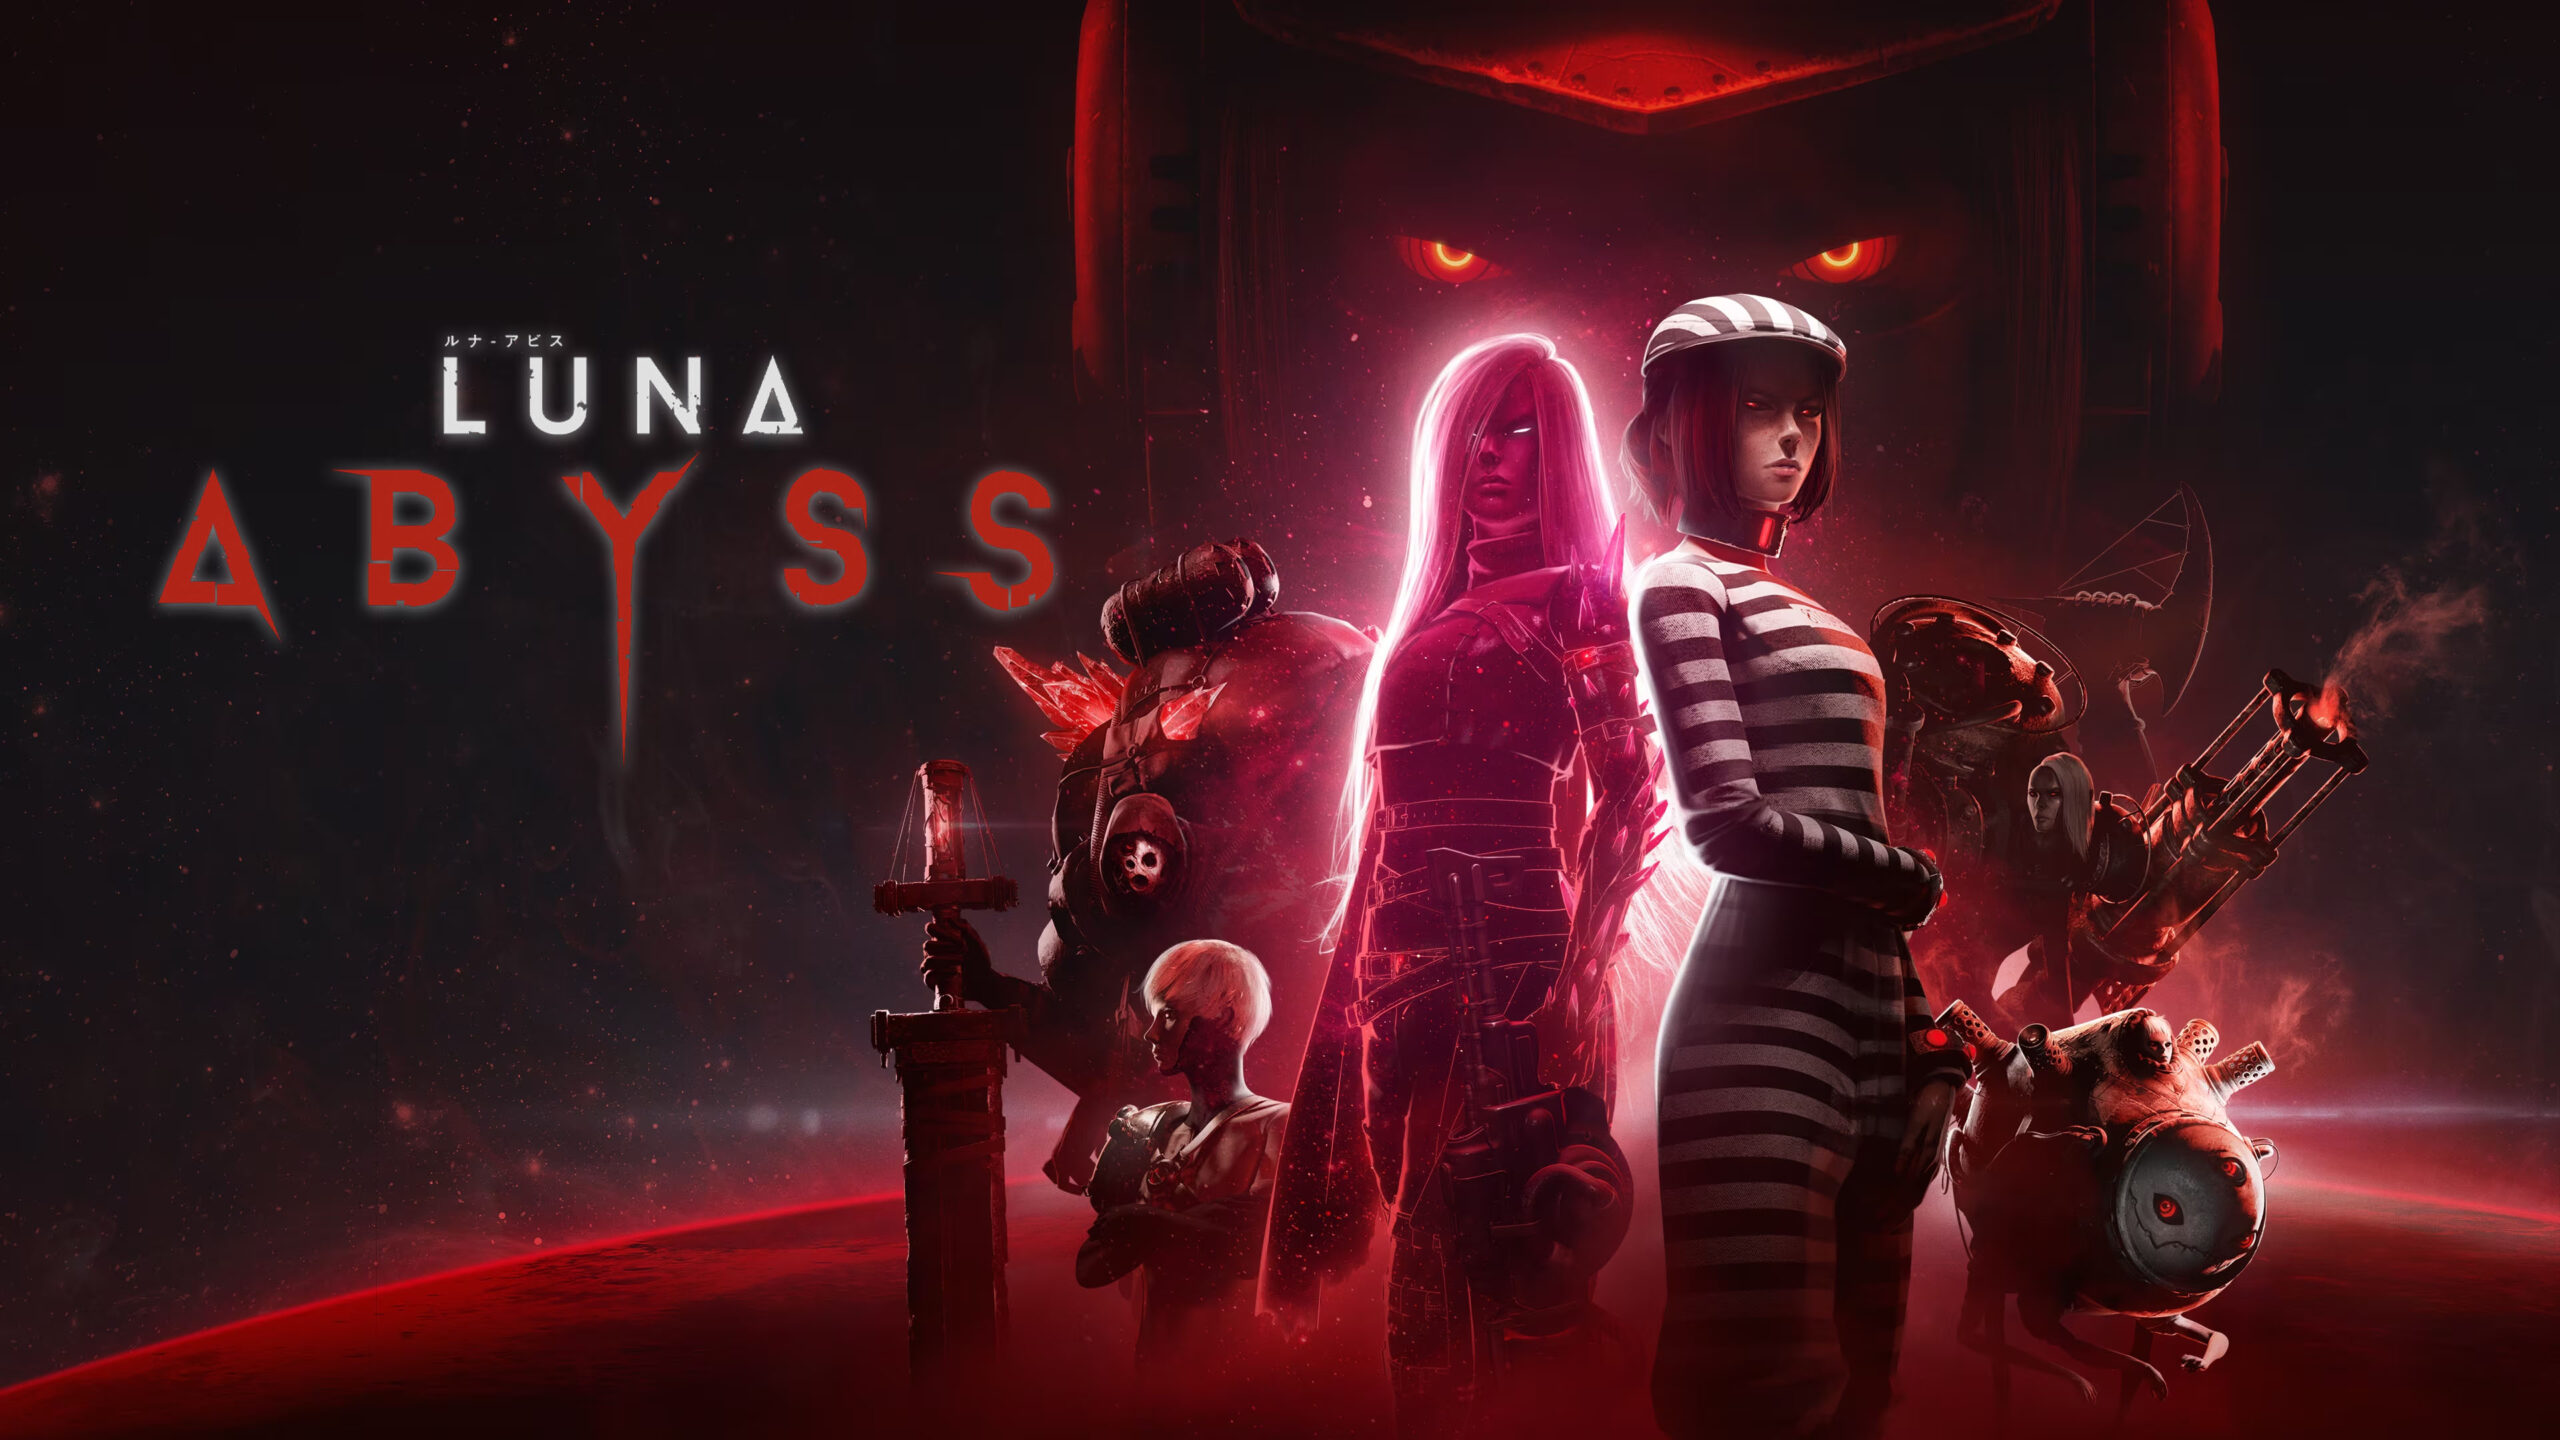 Luna Abyss gets new trailer showing off a derelict sci-fi world